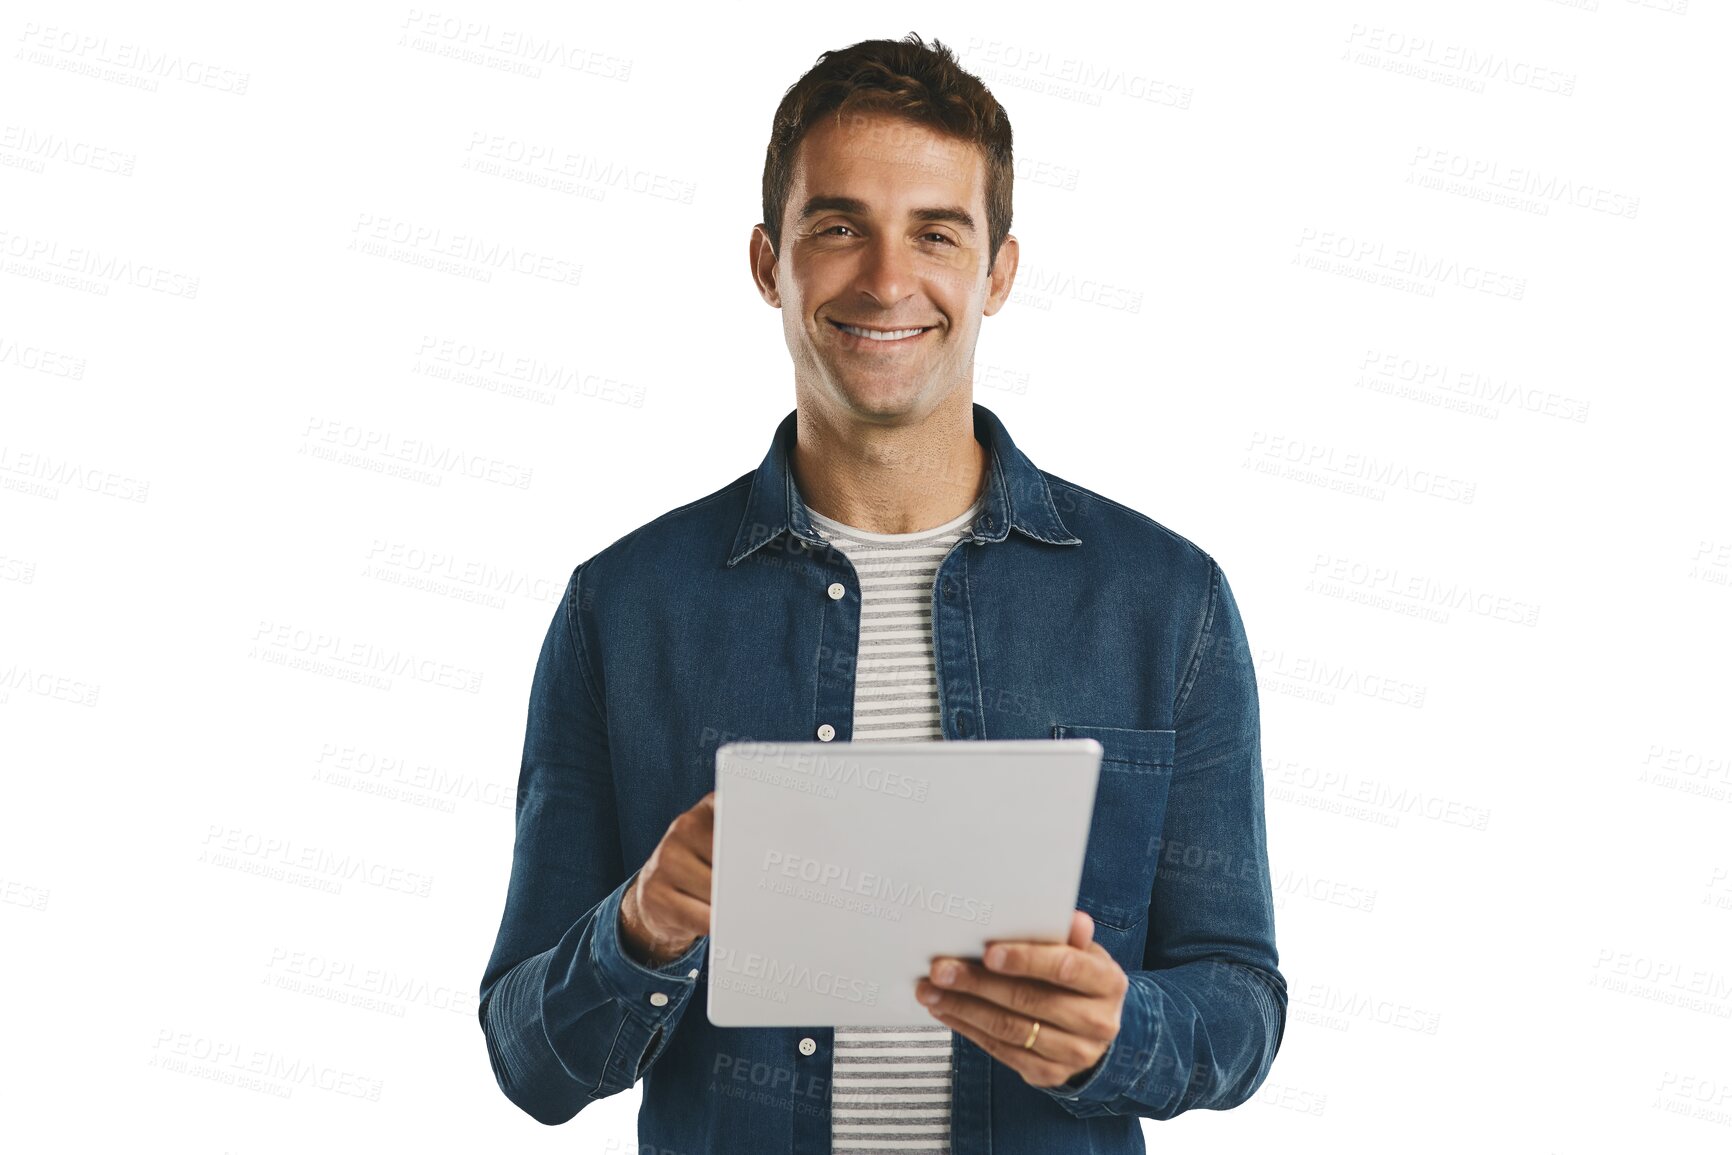 Buy stock photo Portrait, tablet and happy man on internet, scroll and social media isolated on a transparent png background. Digital technology, face and smile of person on app, network and typing email on website